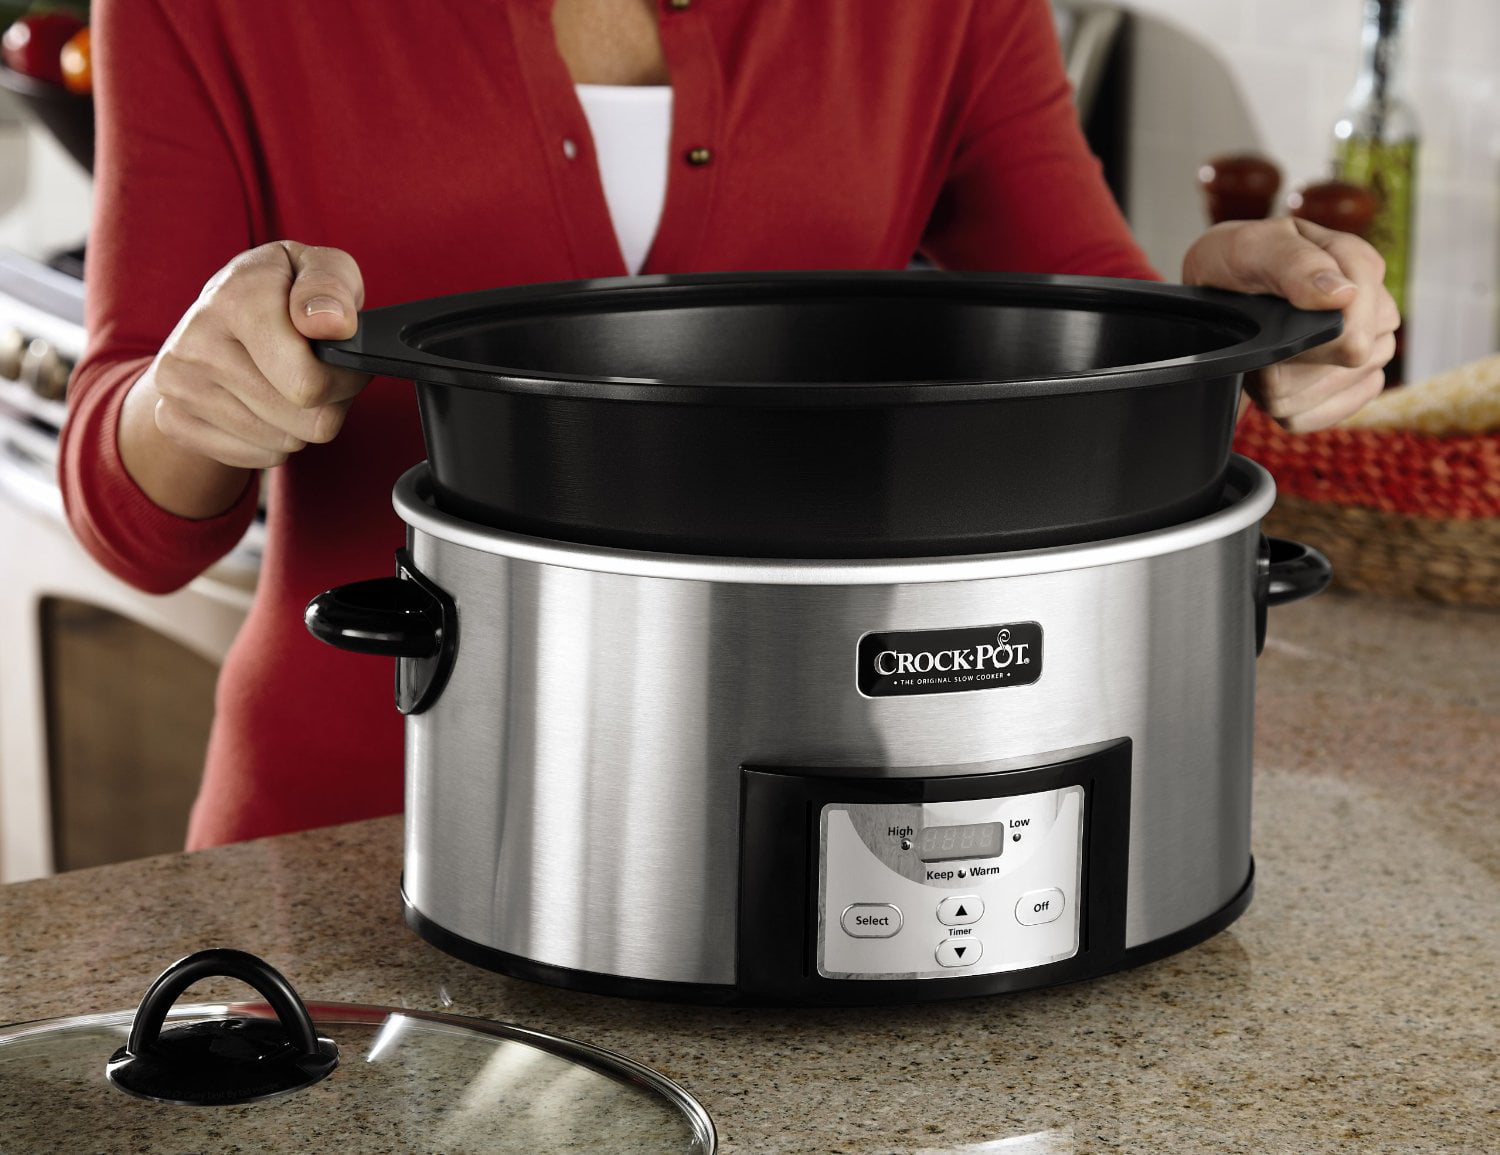  Crock-Pot 6-Quart Countdown Programmable Oval Slow Cooker with  Dipper, Stainless Steel, SCCPVC605-S: Home & Kitchen